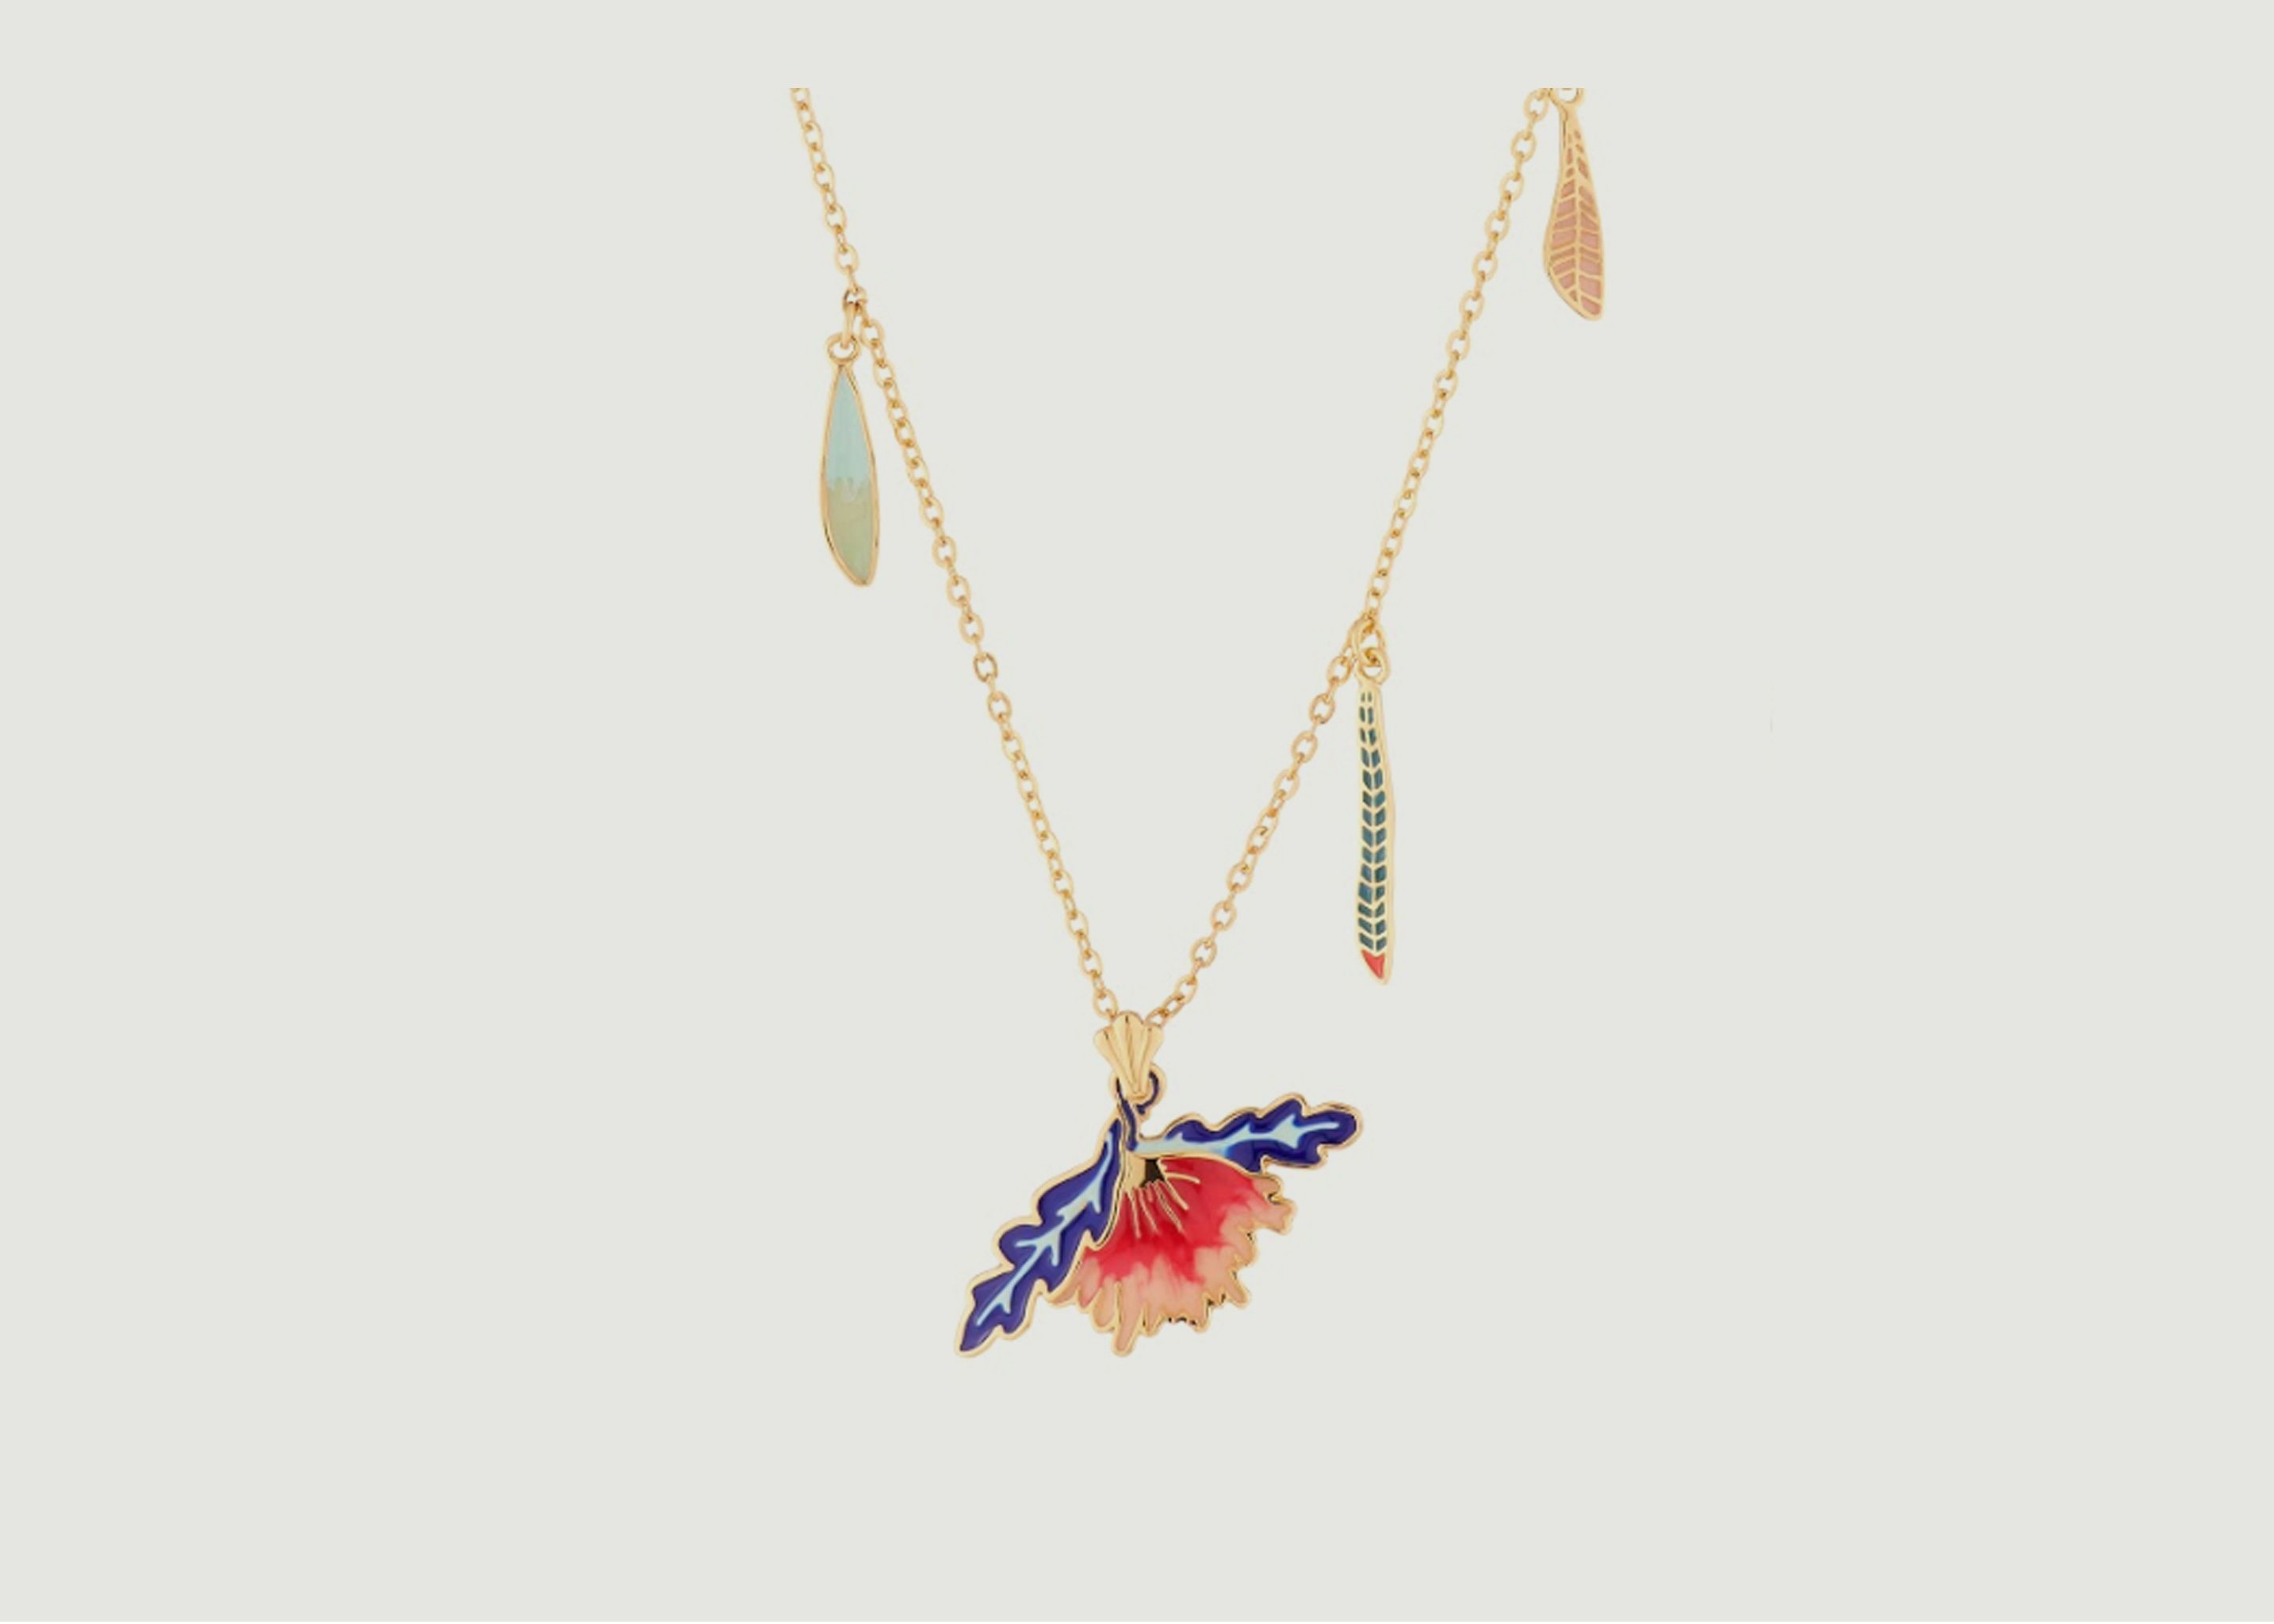 Flower necklace with pendant - N2